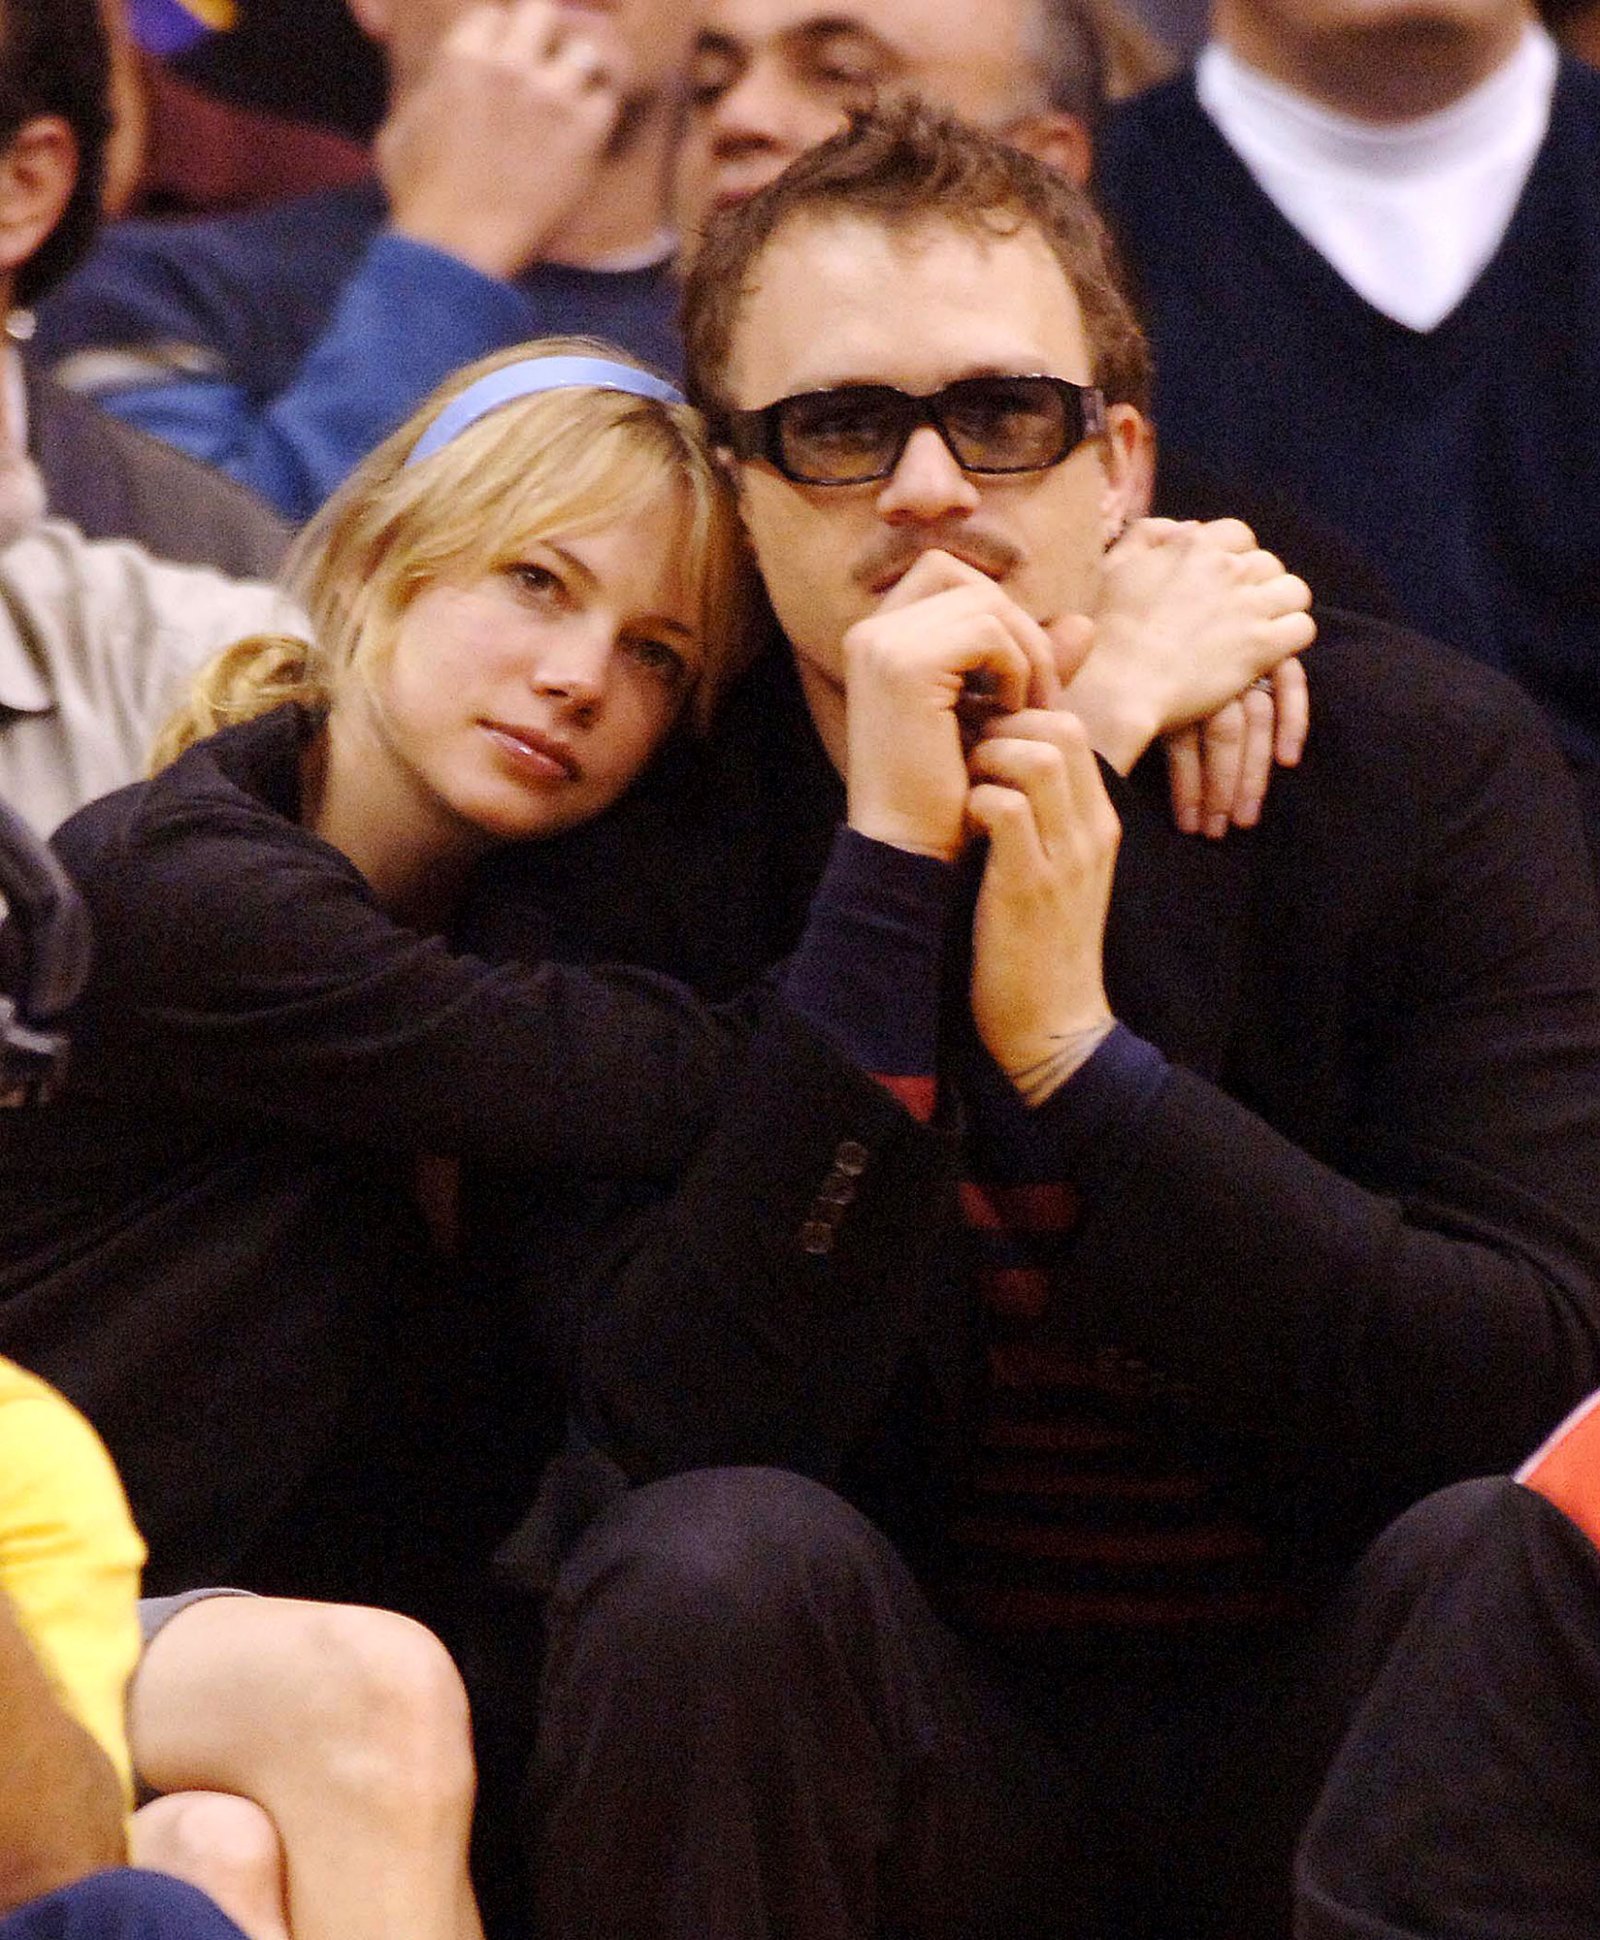 Michelle Williams Most Bittersweet Quotes About Heath Ledger